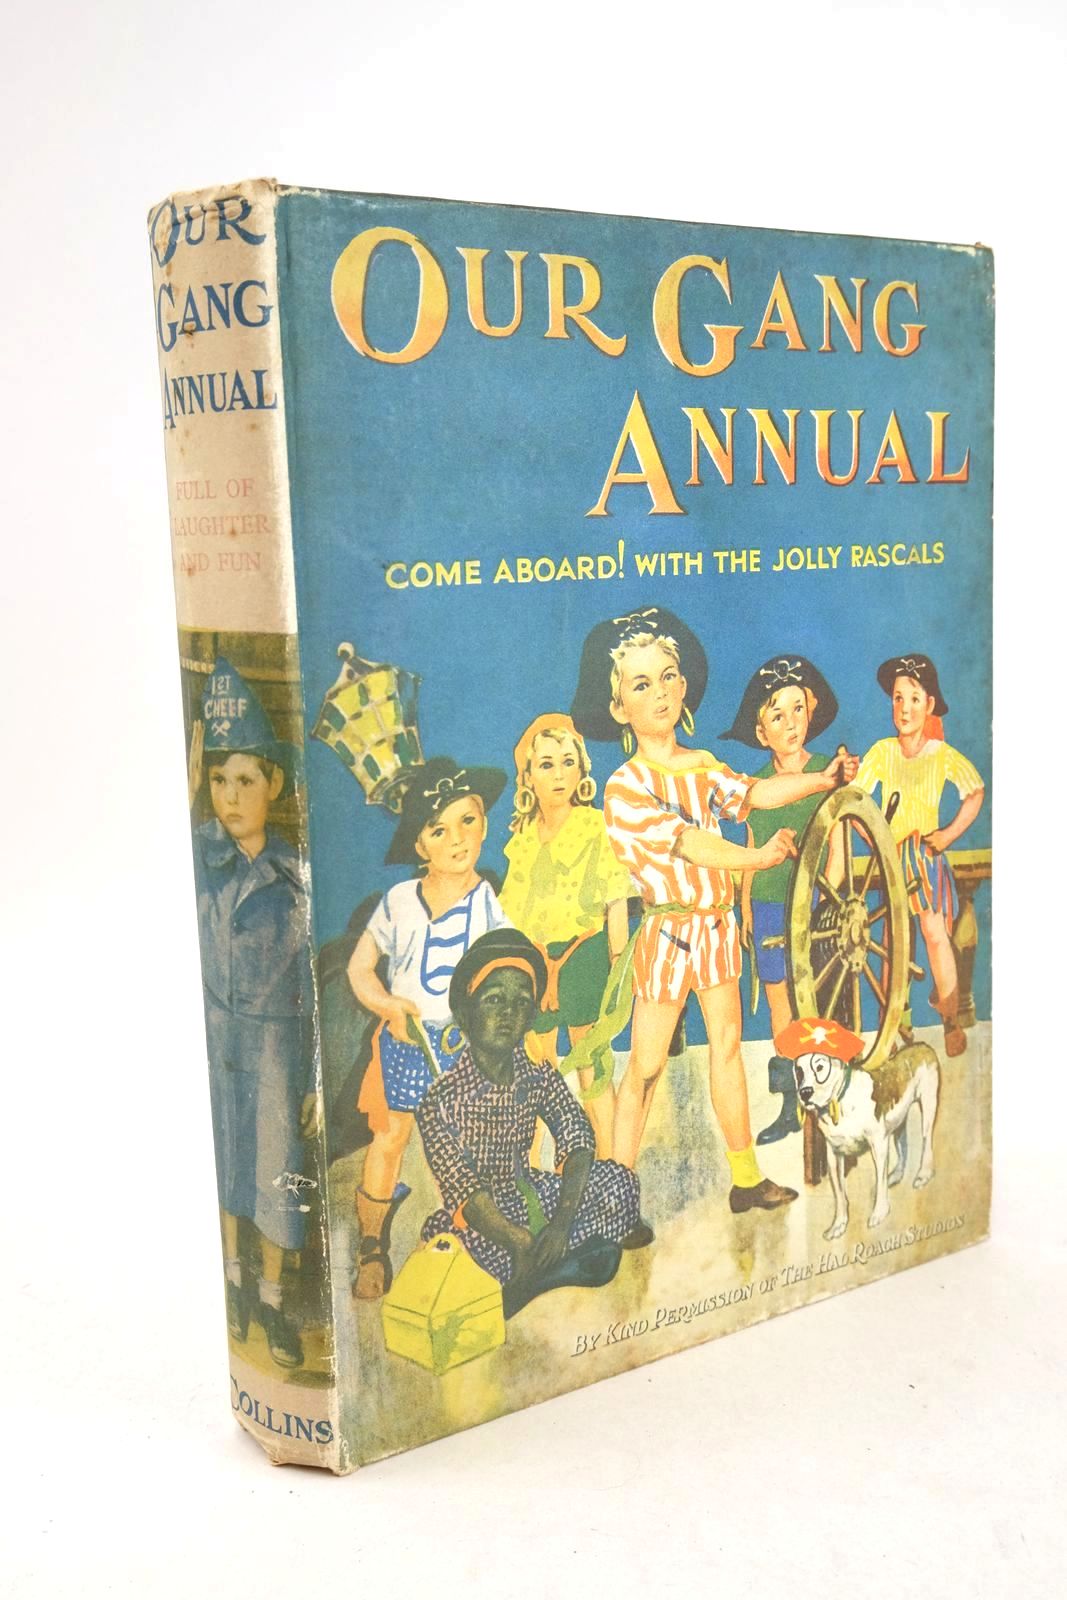 Photo of OUR GANG ANNUAL published by Collins Clear-Type Press (STOCK CODE: 1325968)  for sale by Stella & Rose's Books